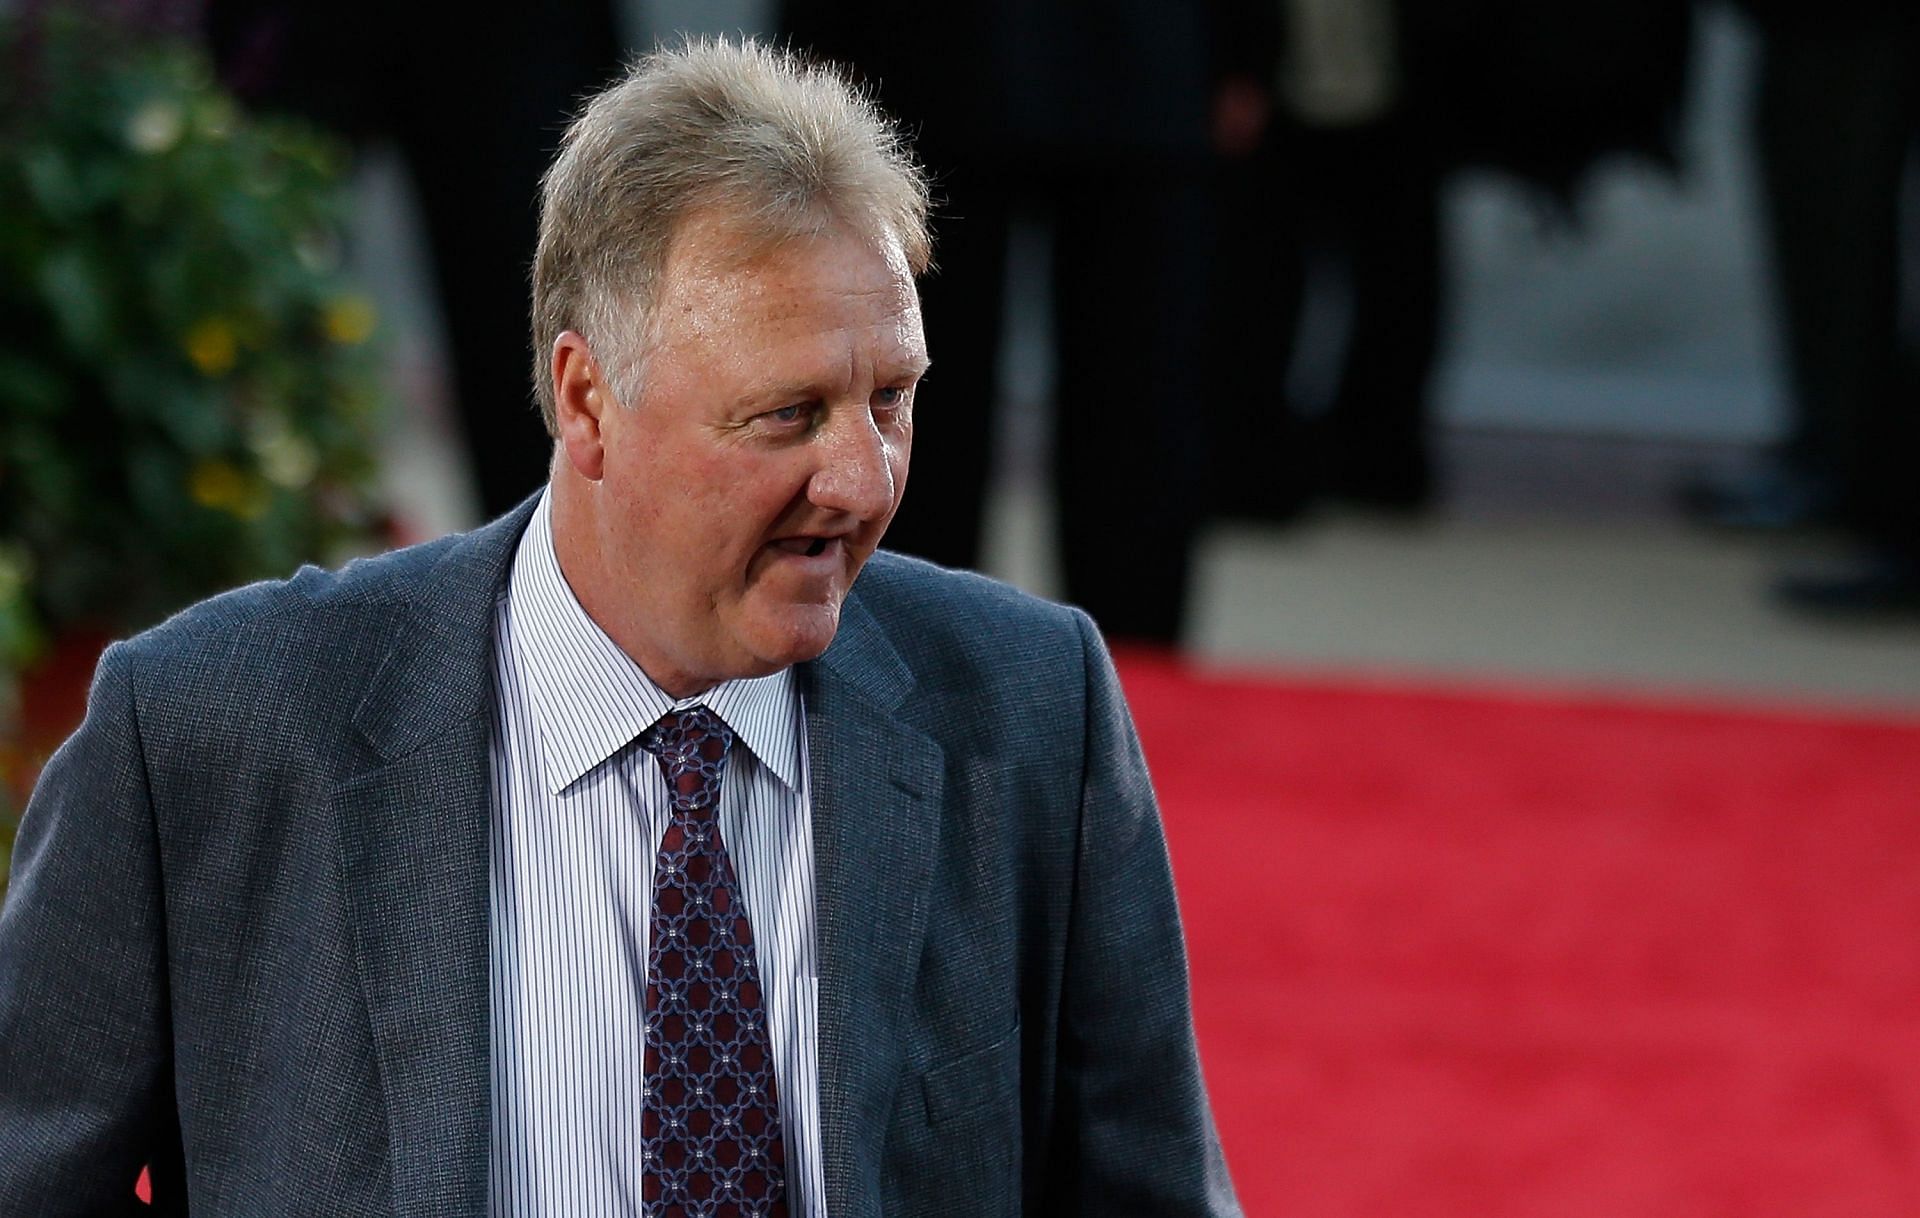 Larry Bird at the 2014 Basketball Hall of Fame Enshrinement Ceremony